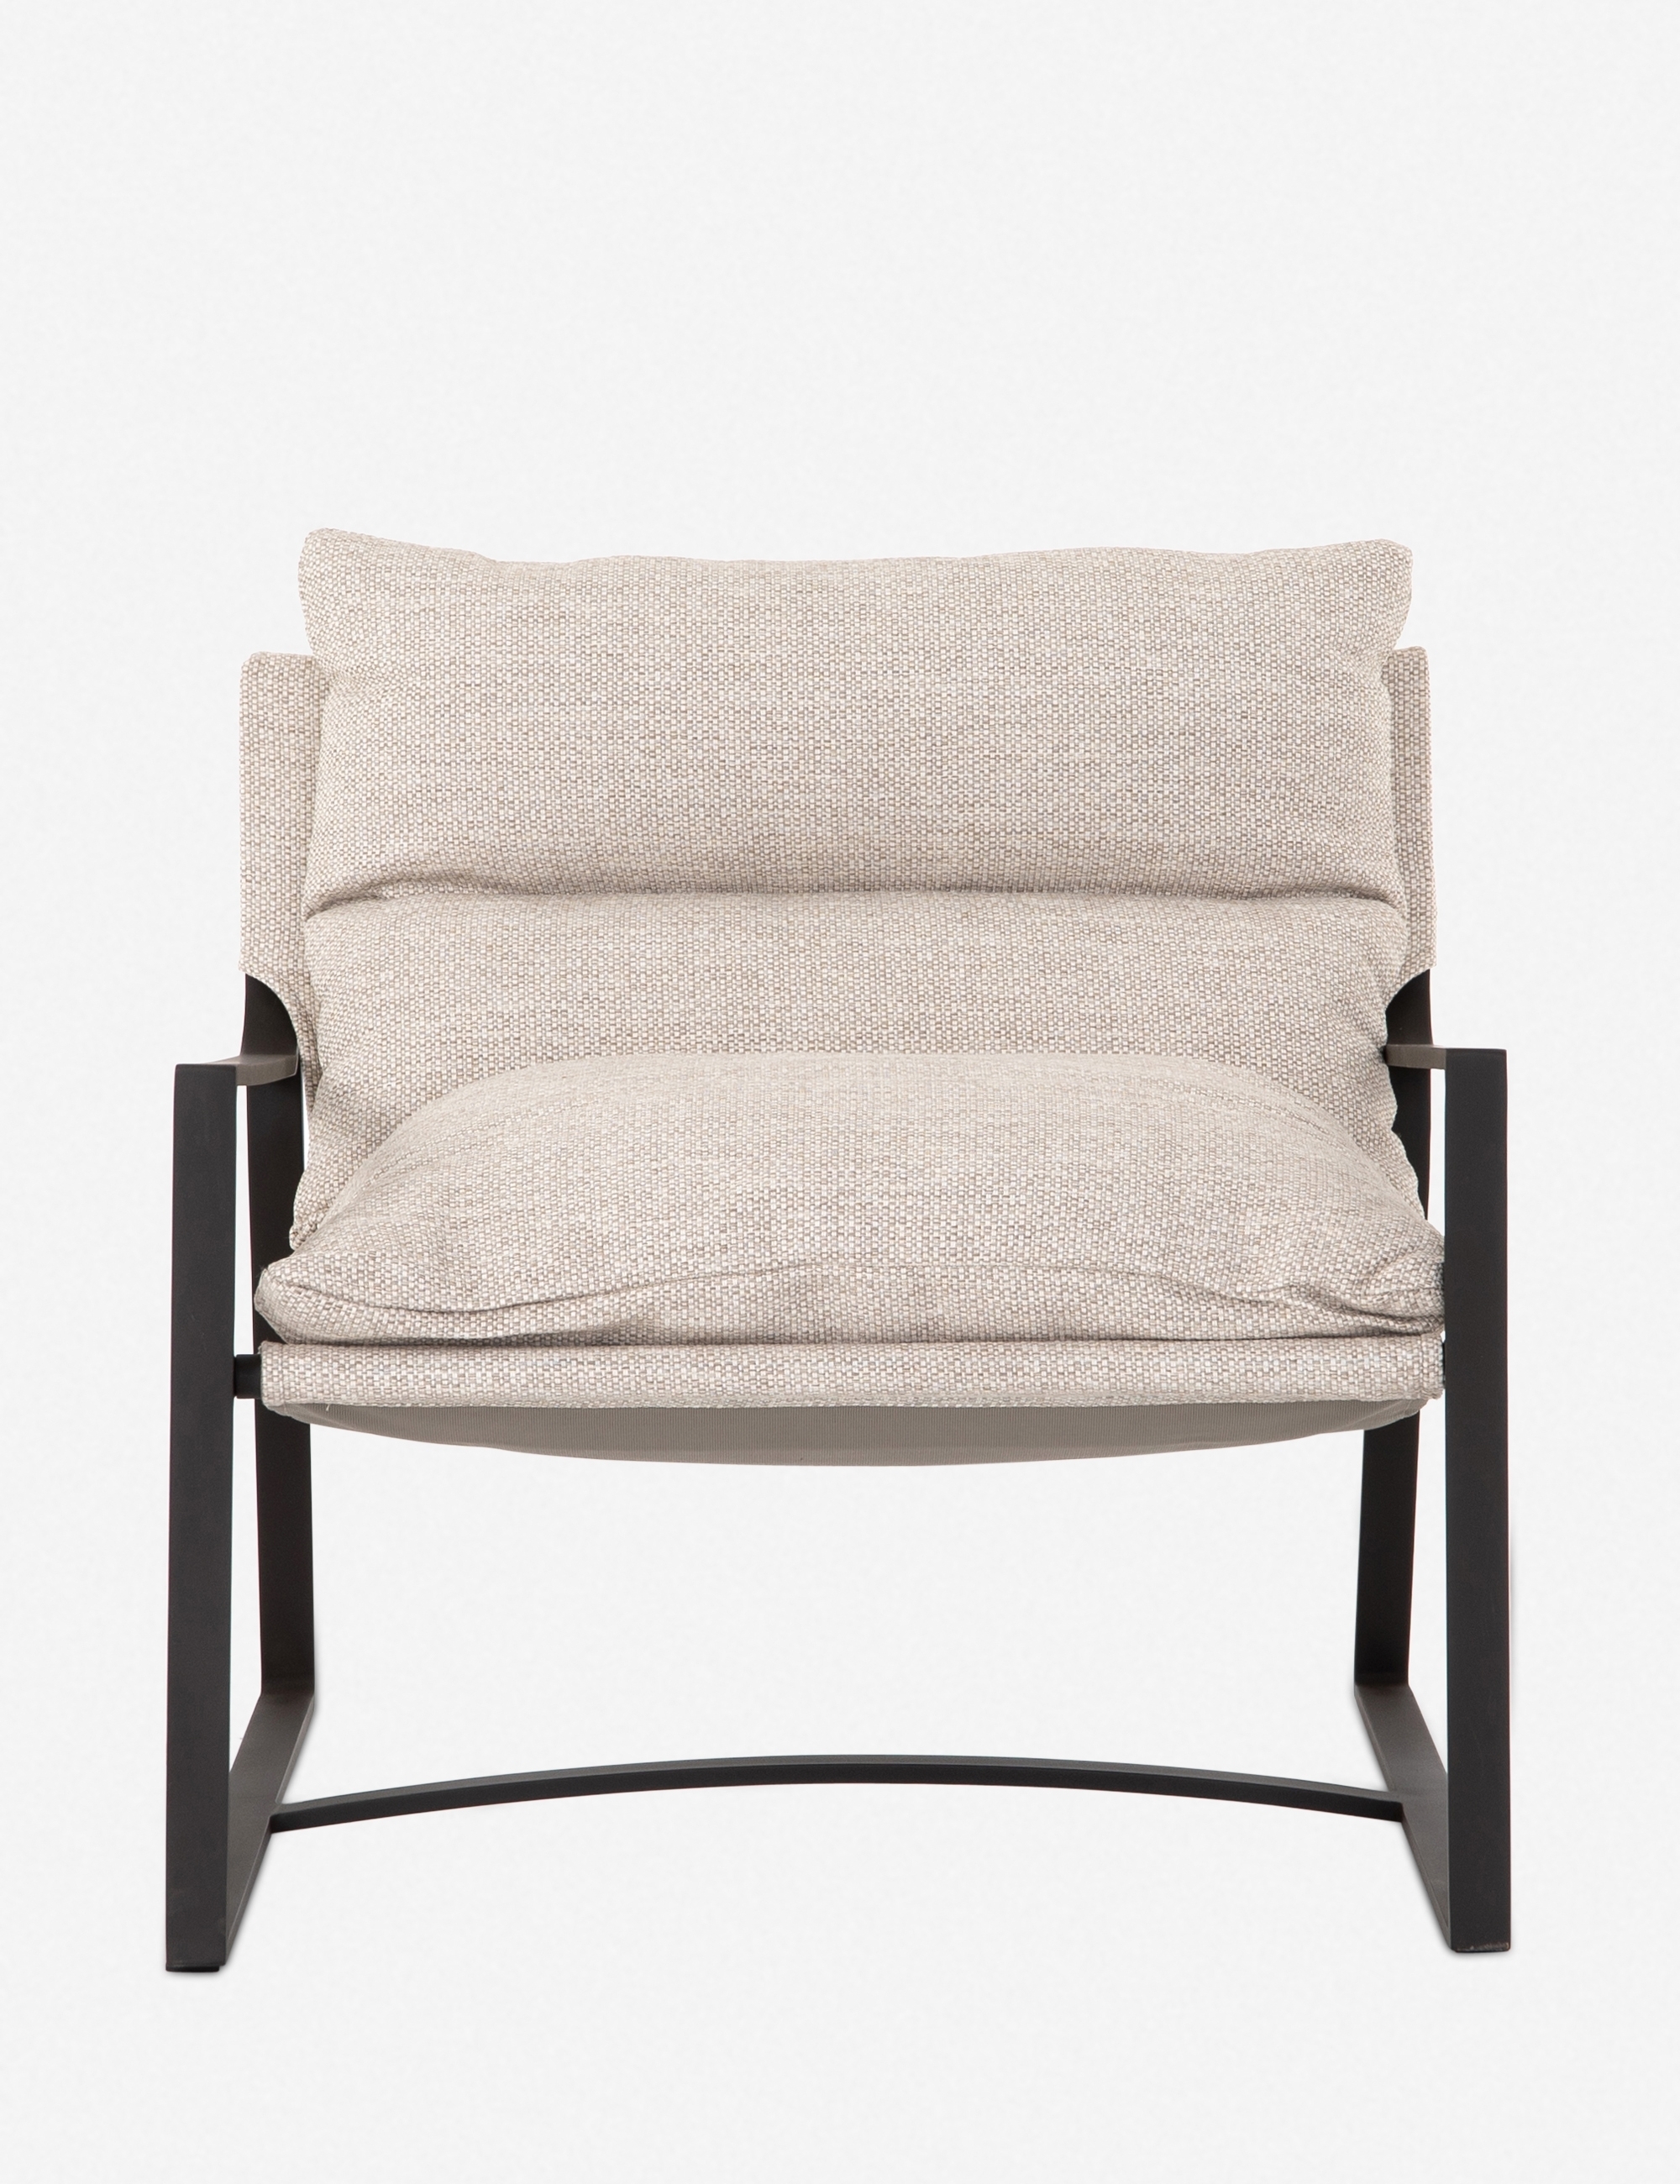 Pali Outdoor Accent Chair - Image 1